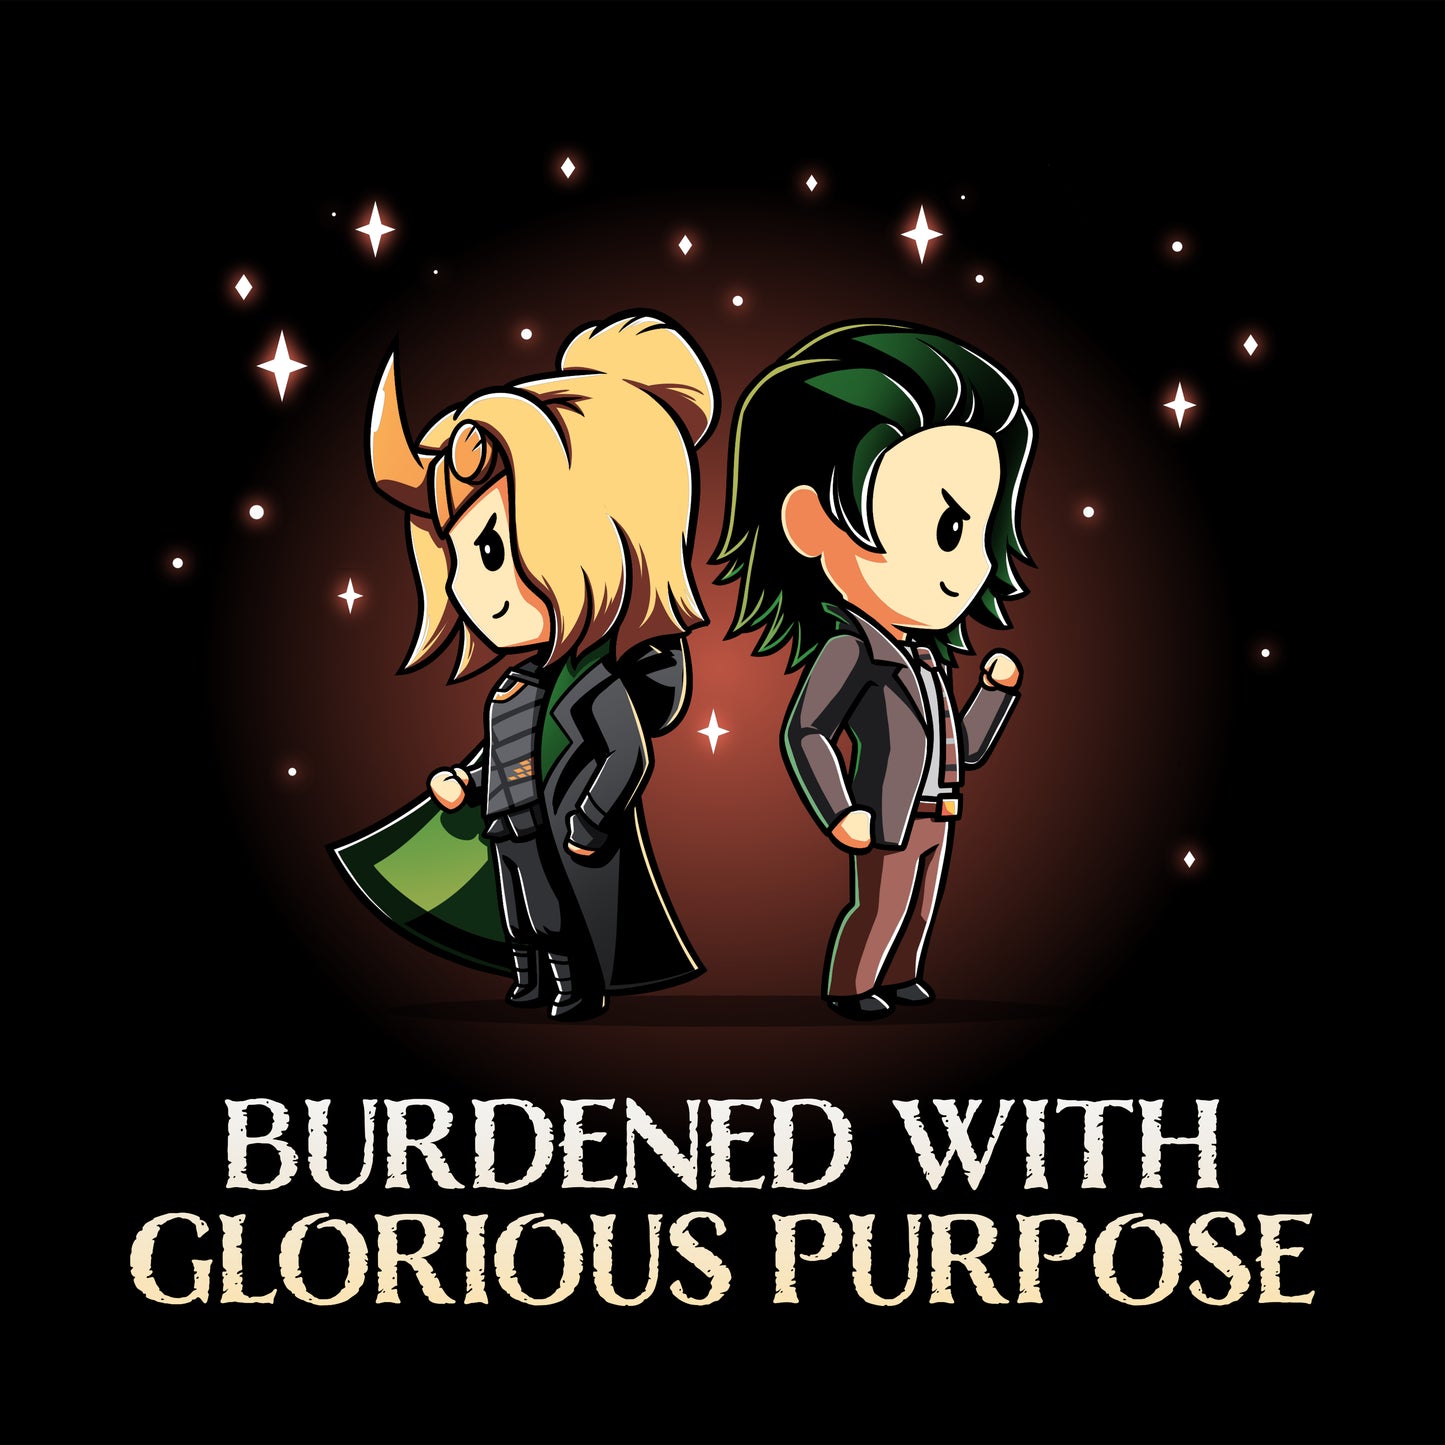 Officially licensed Marvel products featuring Sylvie and Loki, Burdened With Glorious Purpose with Marvel.